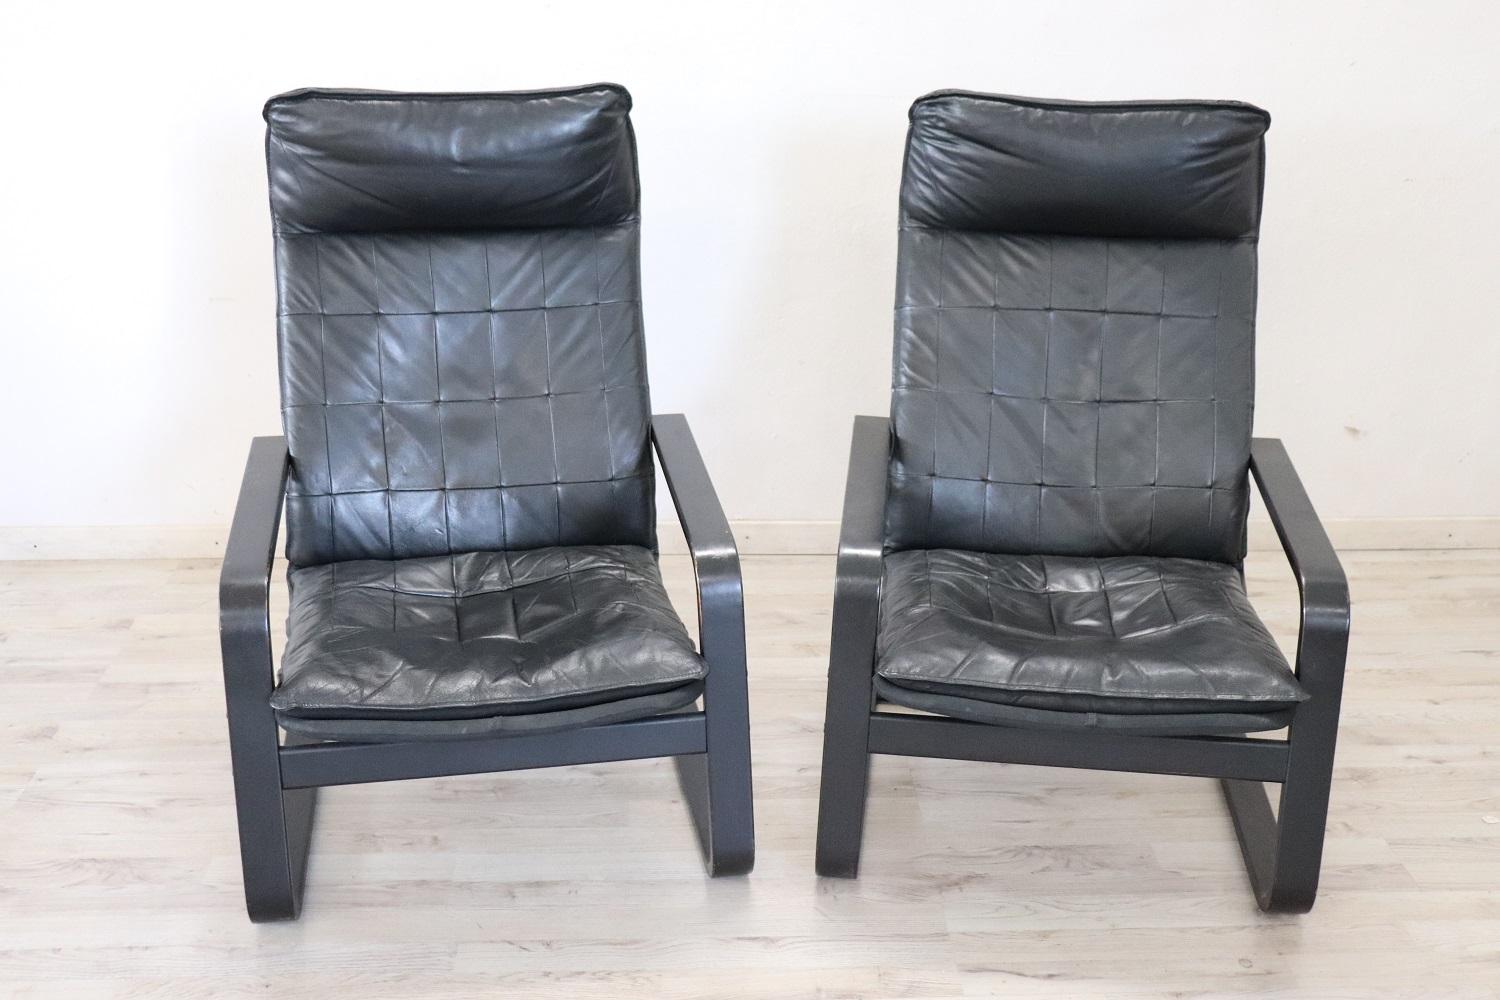 Pair of armchairs Italian design 1970s, the wood is dyed black, covered in black leather. Look at all the images, there are some signs of wear.